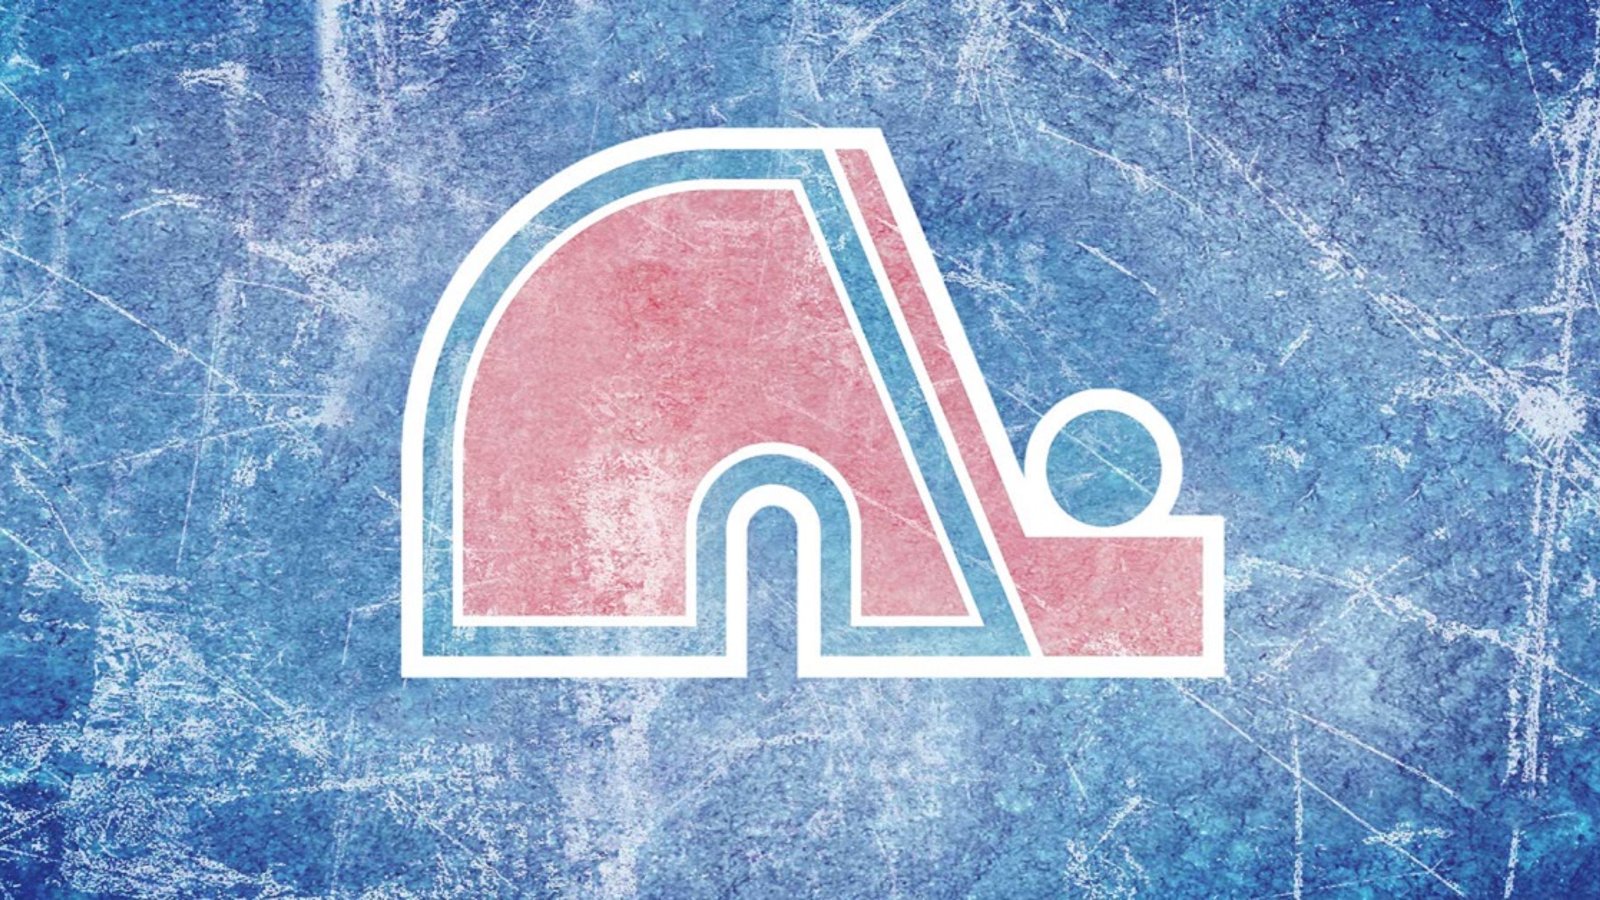 Rumor: Former NHL legend says the return of the Nordiques could happen soon.